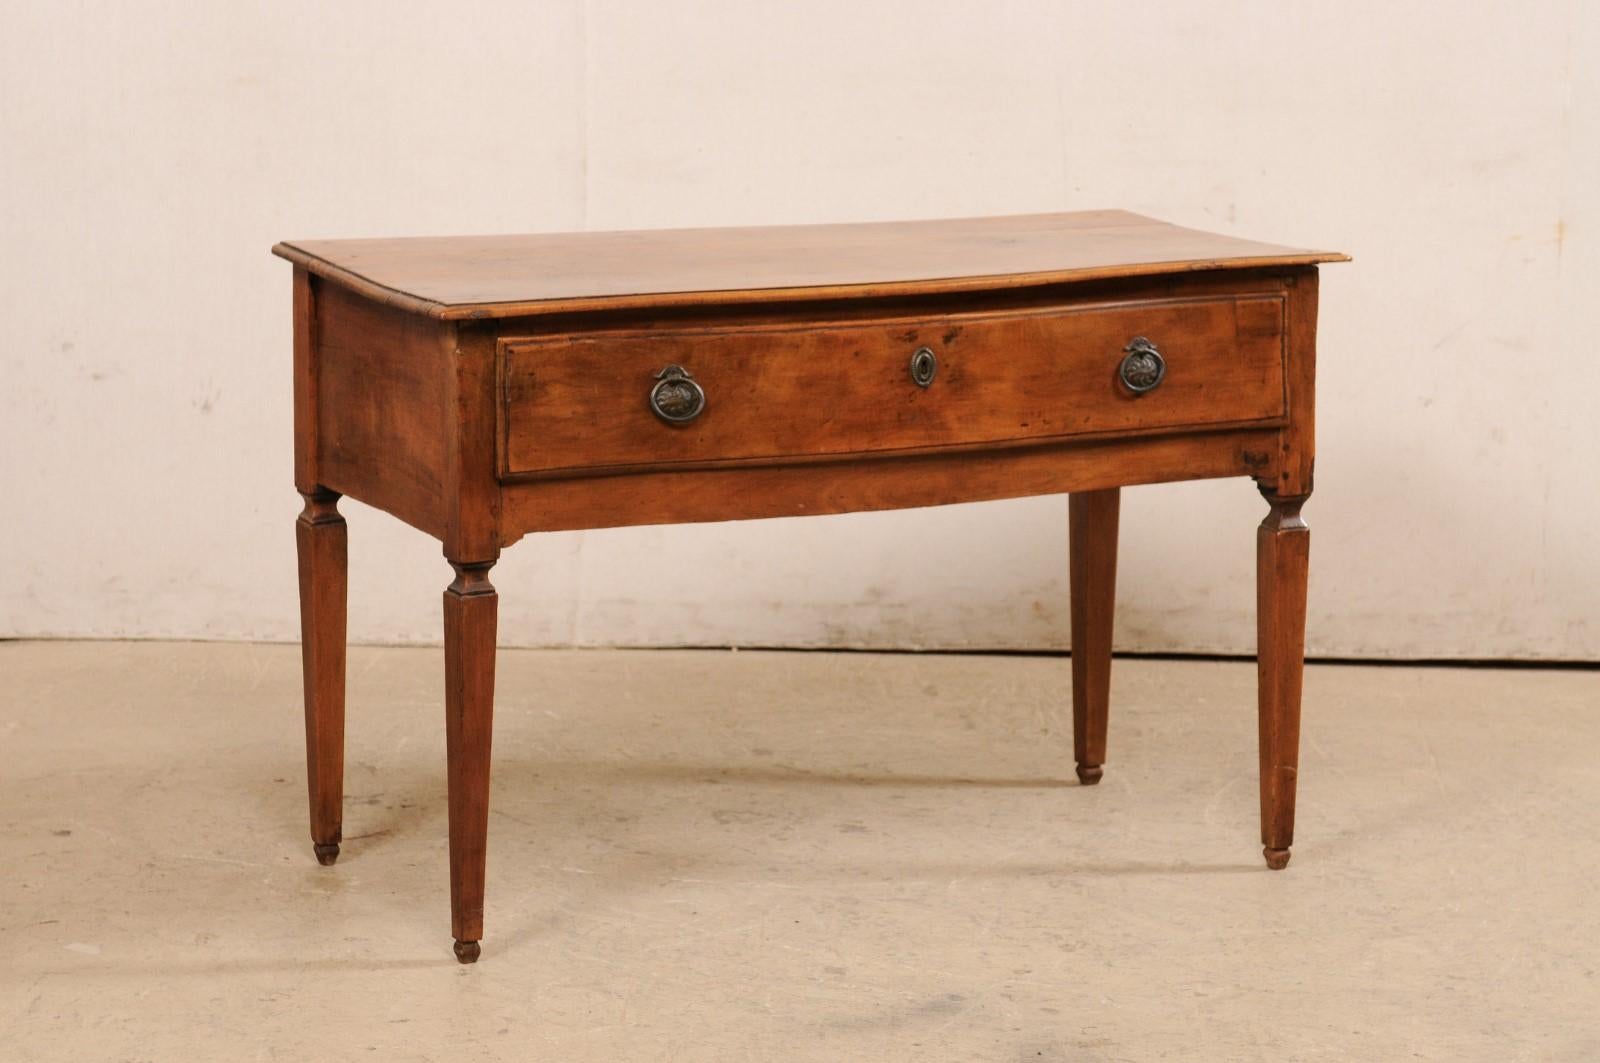 An Italian carved walnut console table, with subtle bow front and single drawer, from the turn of the 18th and 19th century. This antique table from Italy features a rectangular-shaped top which has a slightly bow-shaped front which overhangs and